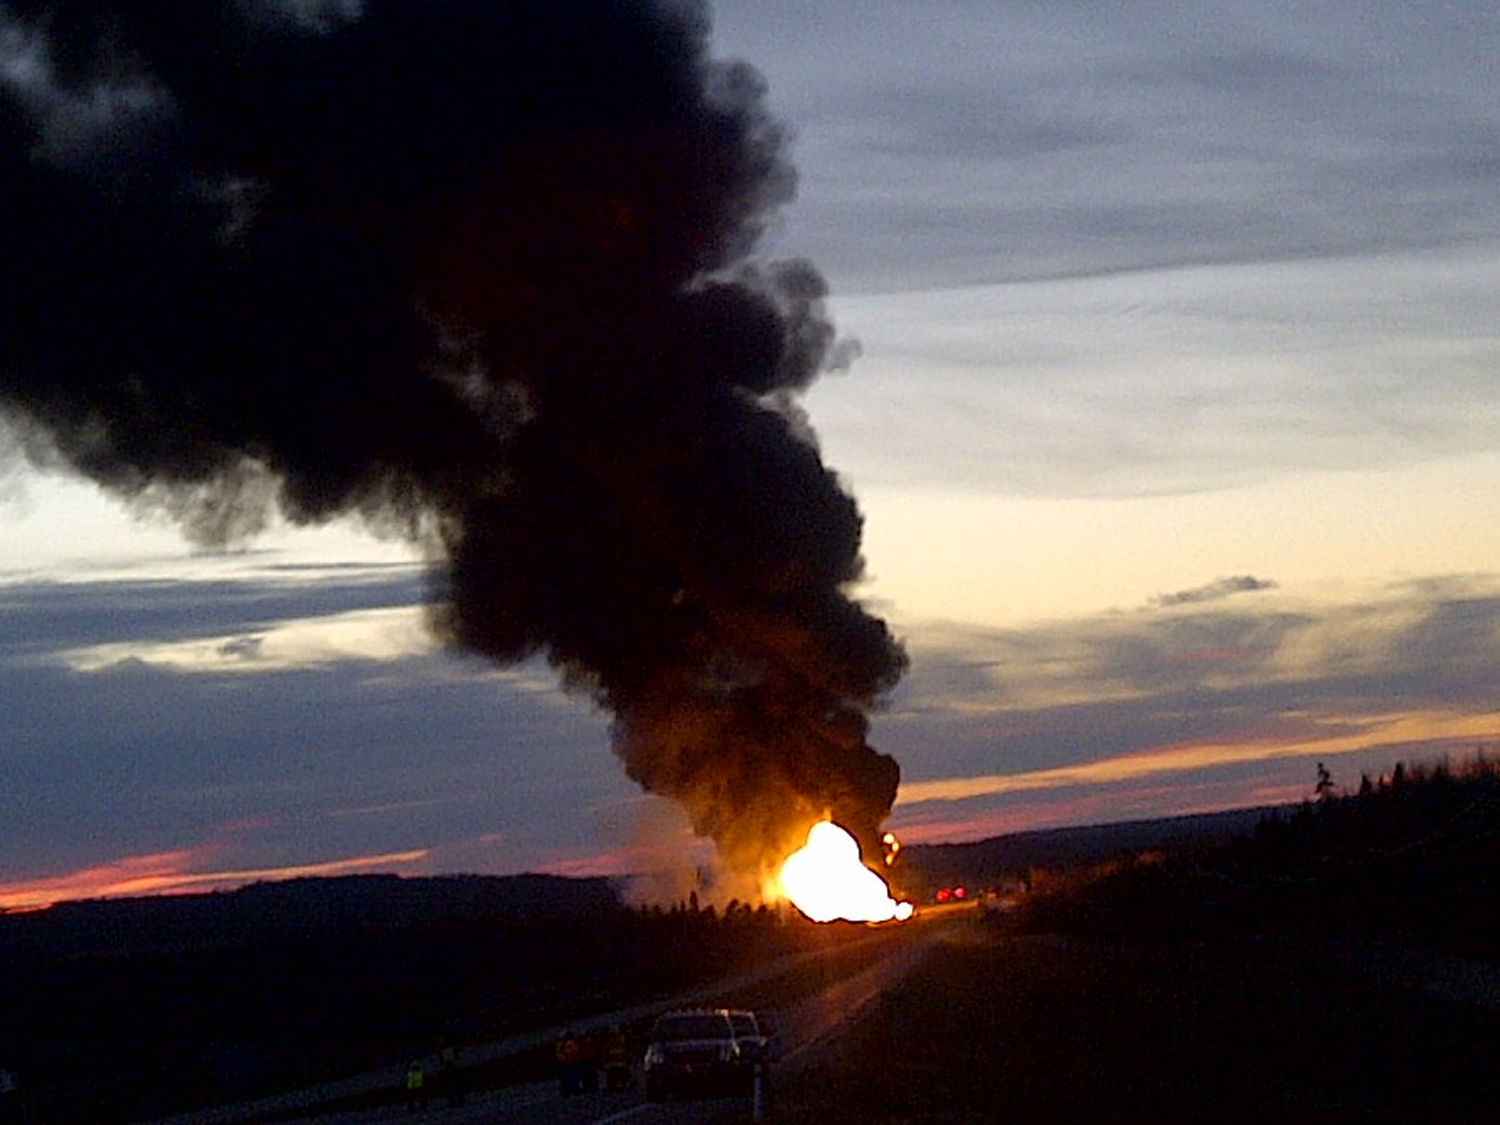 Controlled burn of product in derailed tank cars near Gainford, Alberta